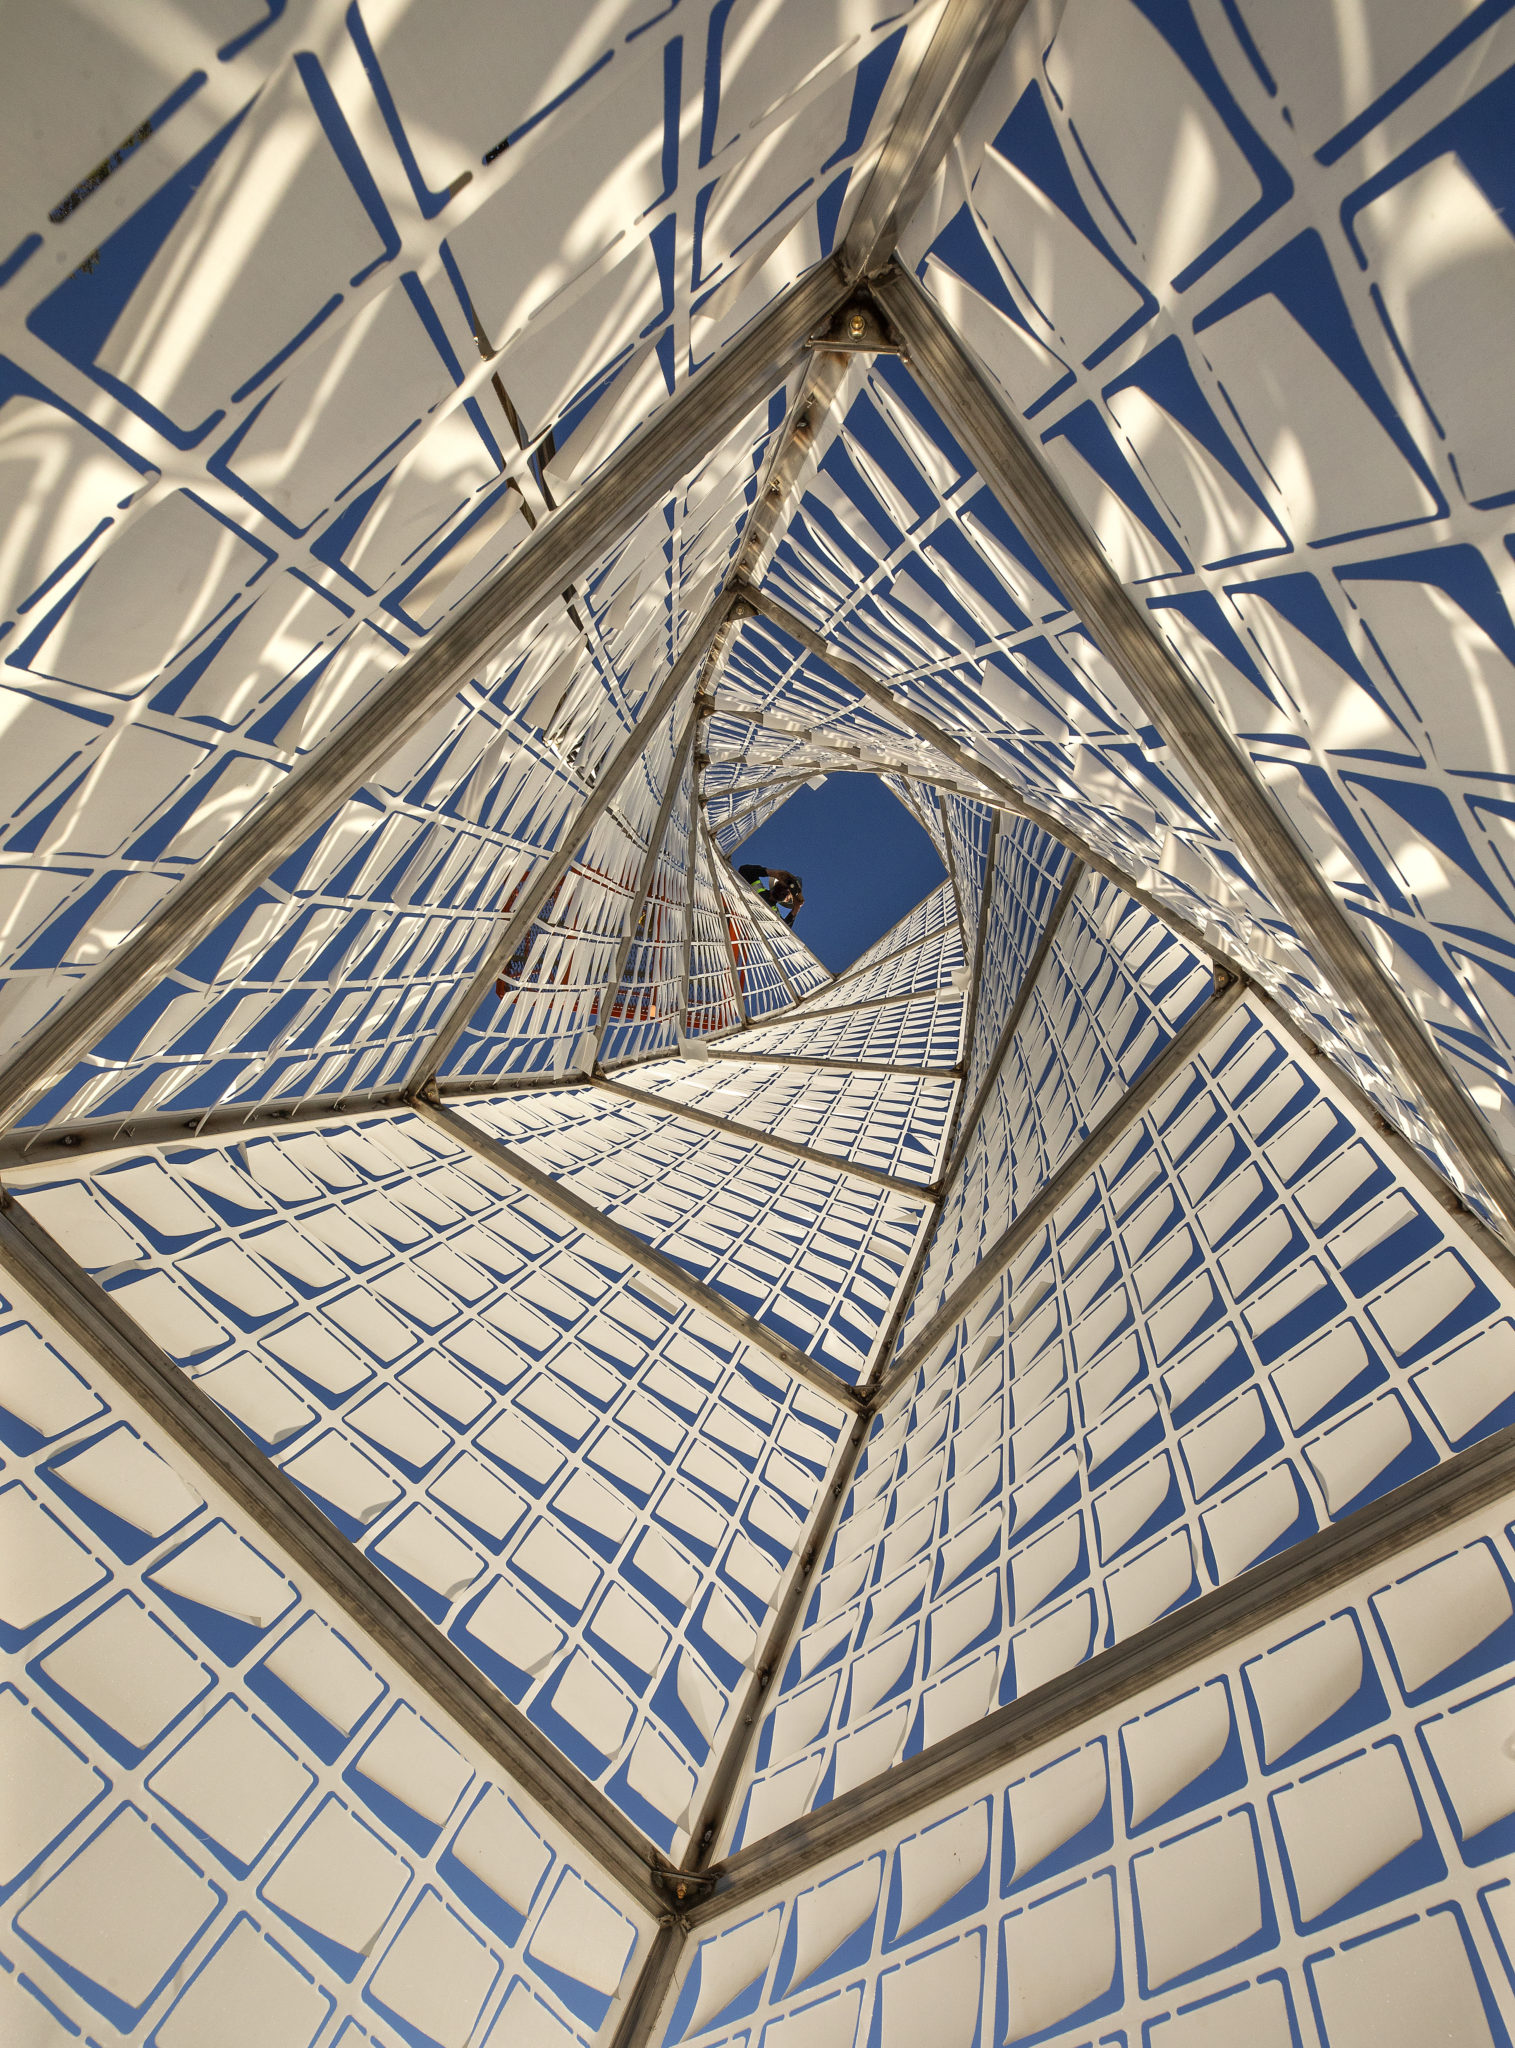 Looking upward through a 30-foot "Twisted Tower" covered in laser cut teflon squares designed to move in the wind in a temporary "Air Garden" created by artist Ned Kahn on the site of the future Hotel Sebastopol on Friday, December 11, 2020. (Photo by John Burgess/The Press Democrat)